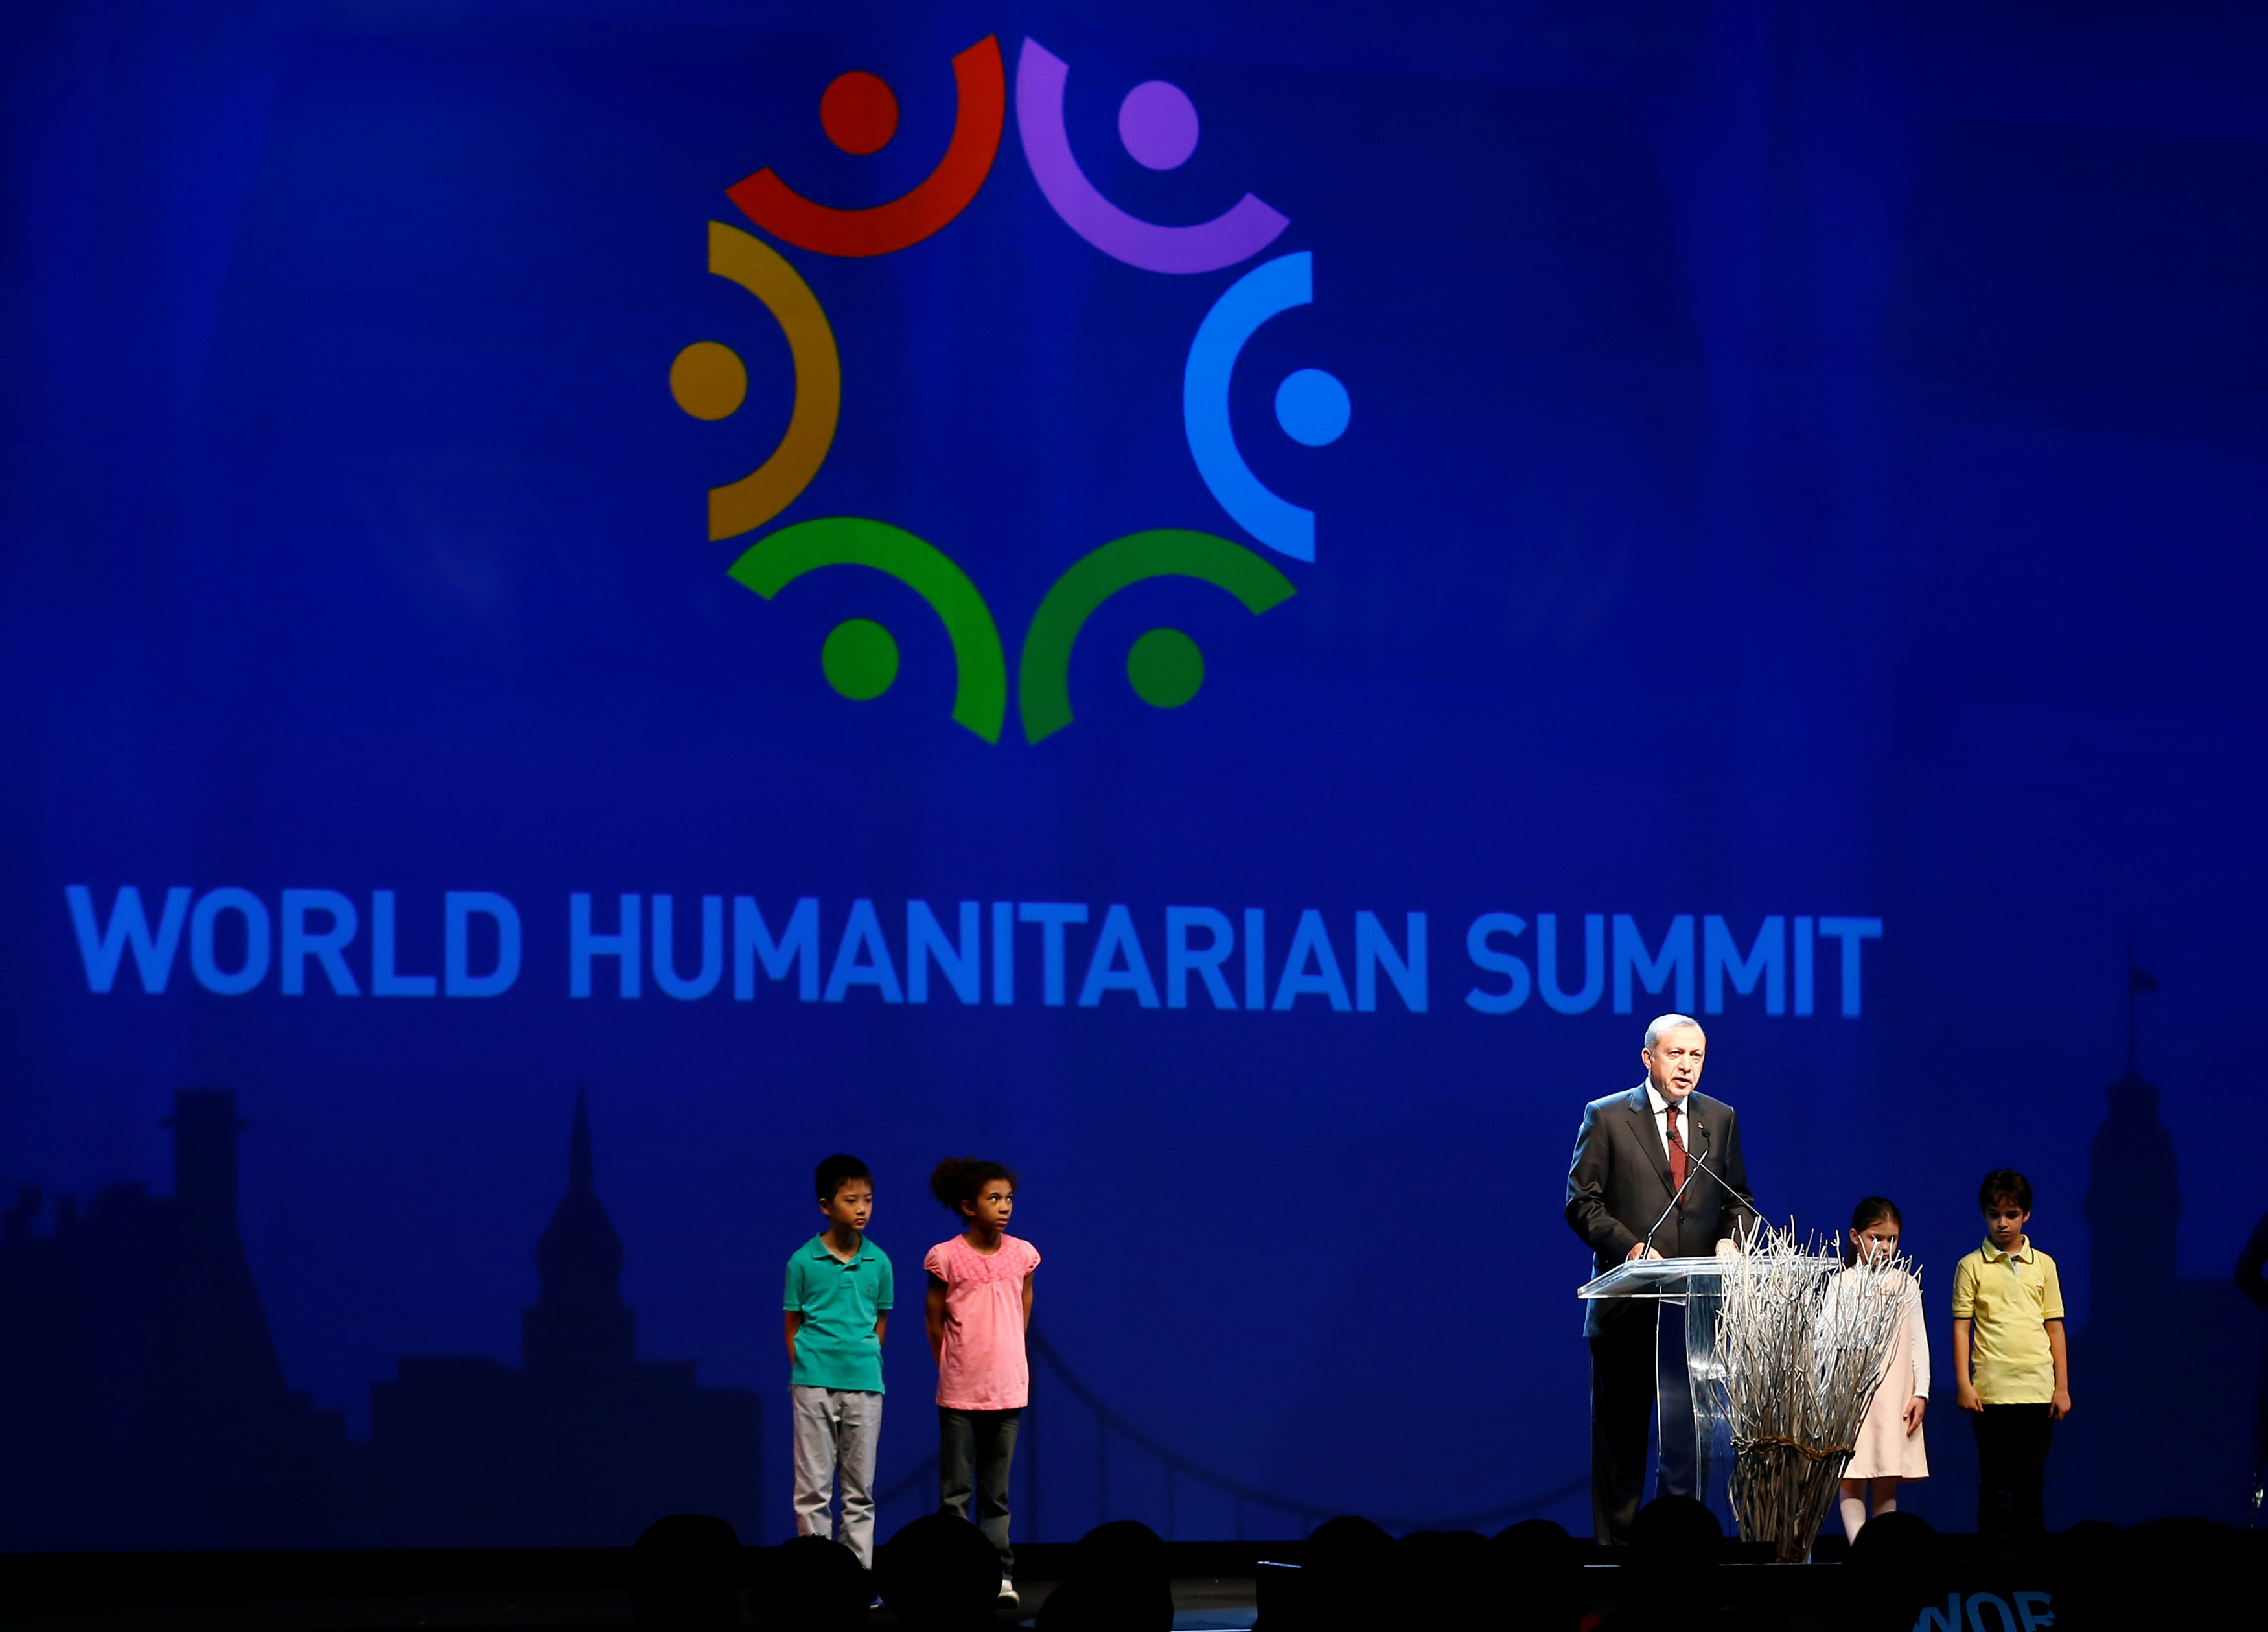 World Humanitarian Summit: Laudable, but short on hard political commitments